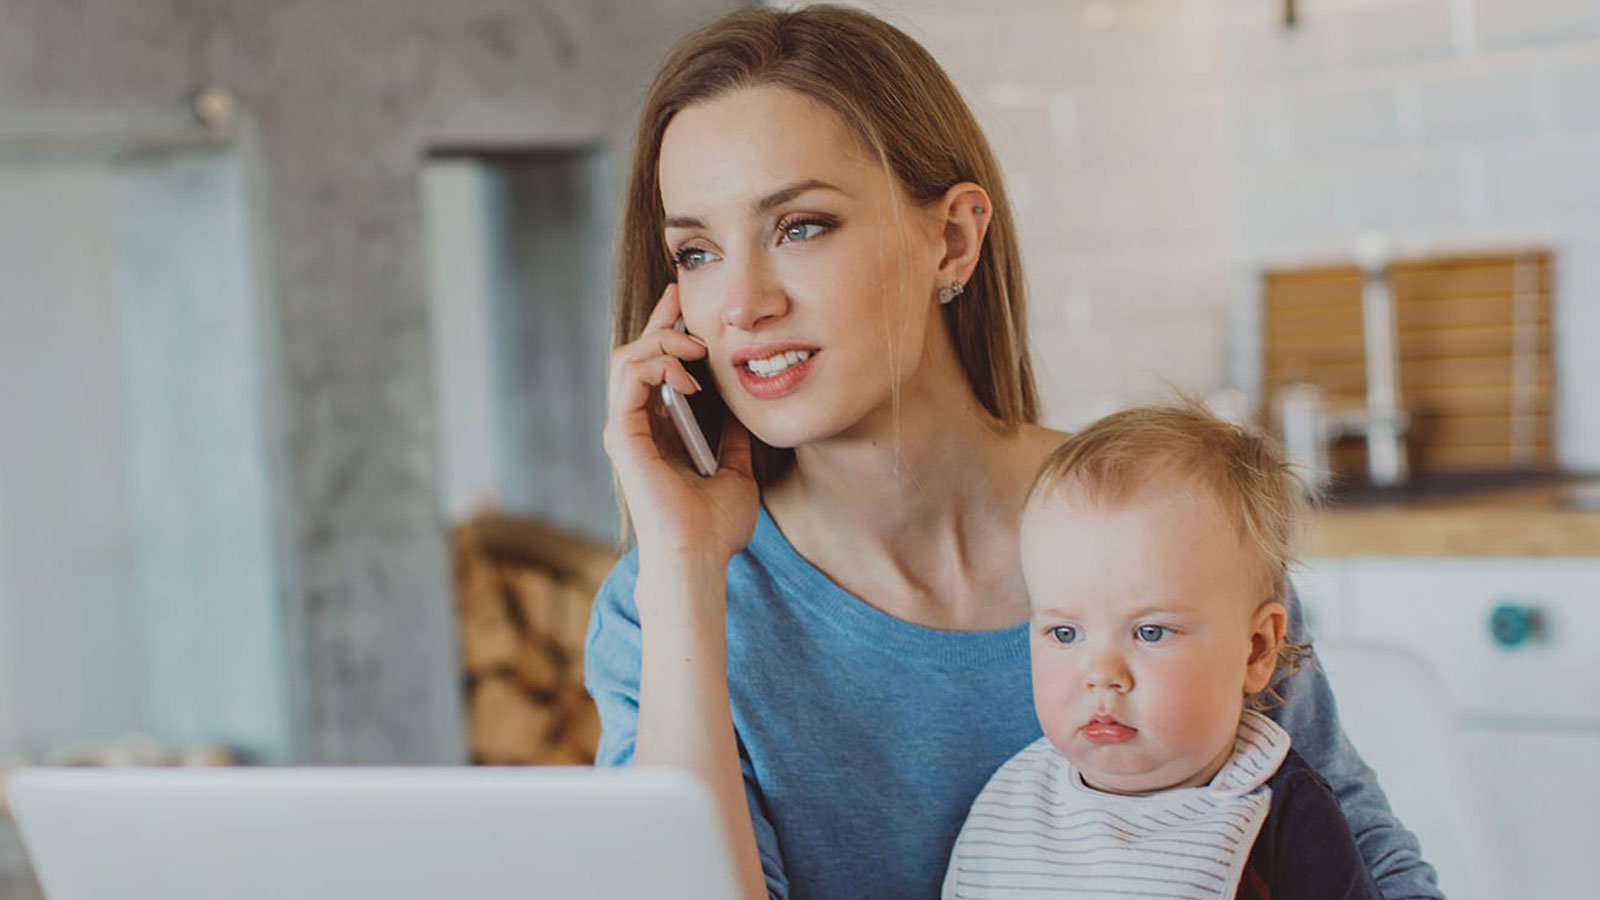 Woman with baby talking on phone